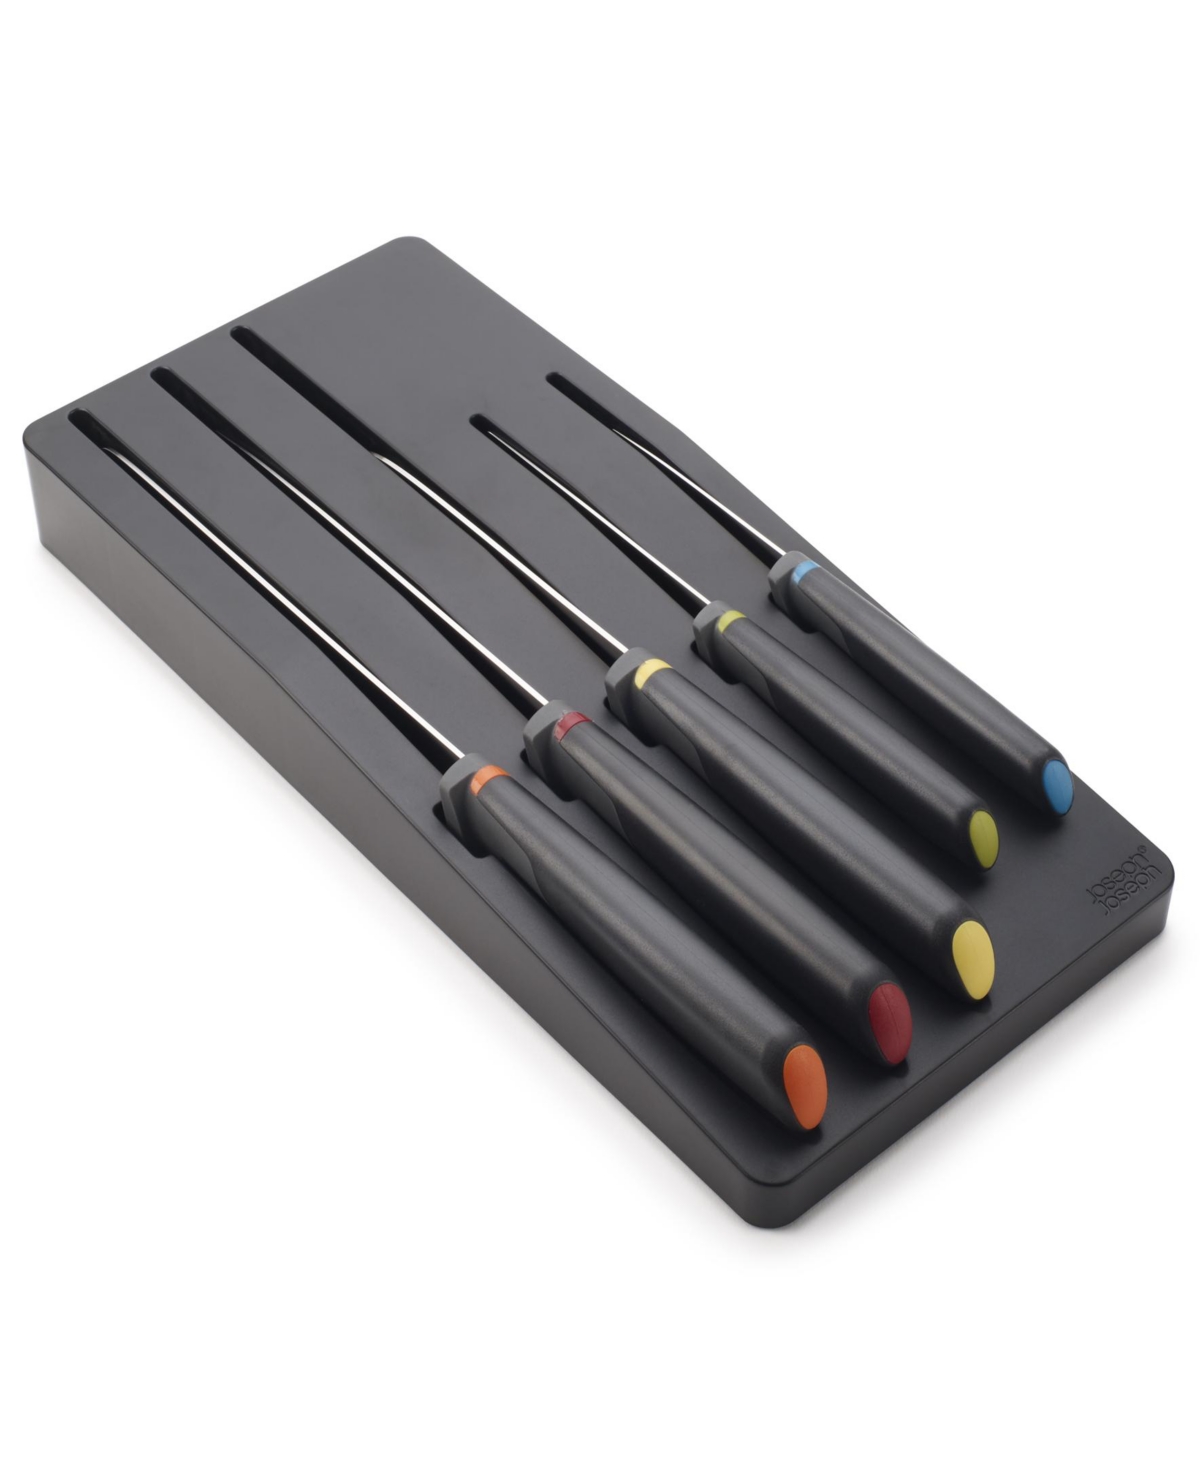 Joseph Joseph Elevate Knives Store 5-piece Knife Set With In-drawer Storage Tray In Multicolor